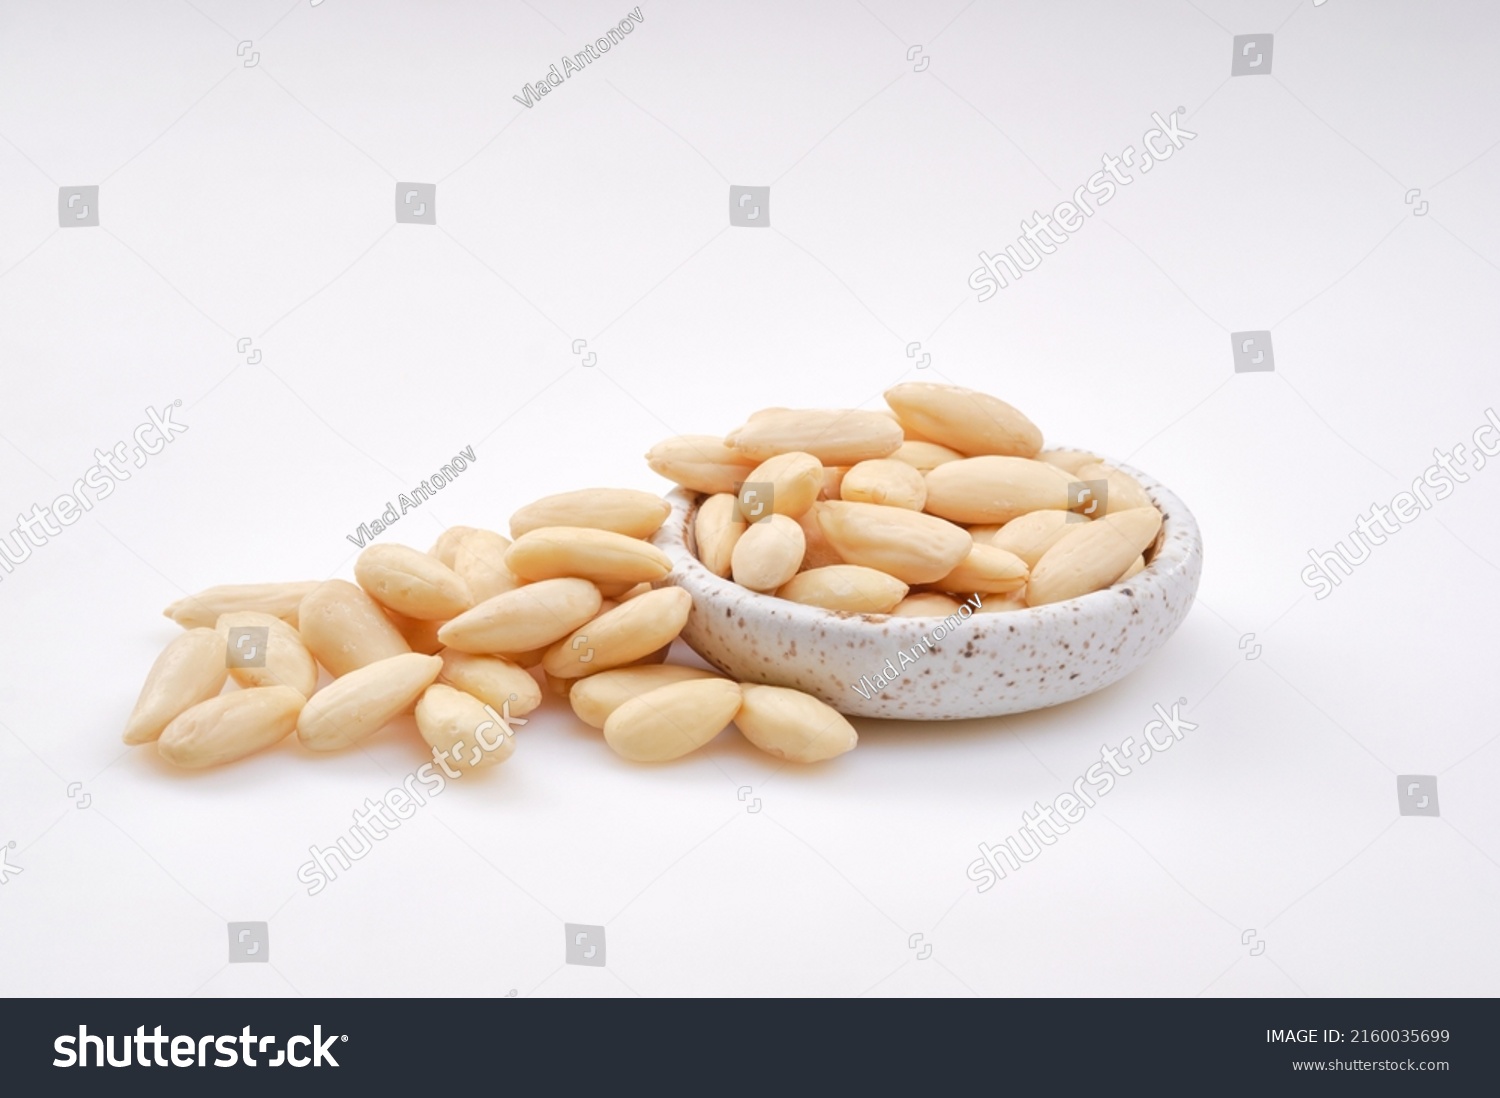 Pile of peeled or blanched almonds. White bowl of peeled whole almonds on white background. Shallow depth of field #2160035699